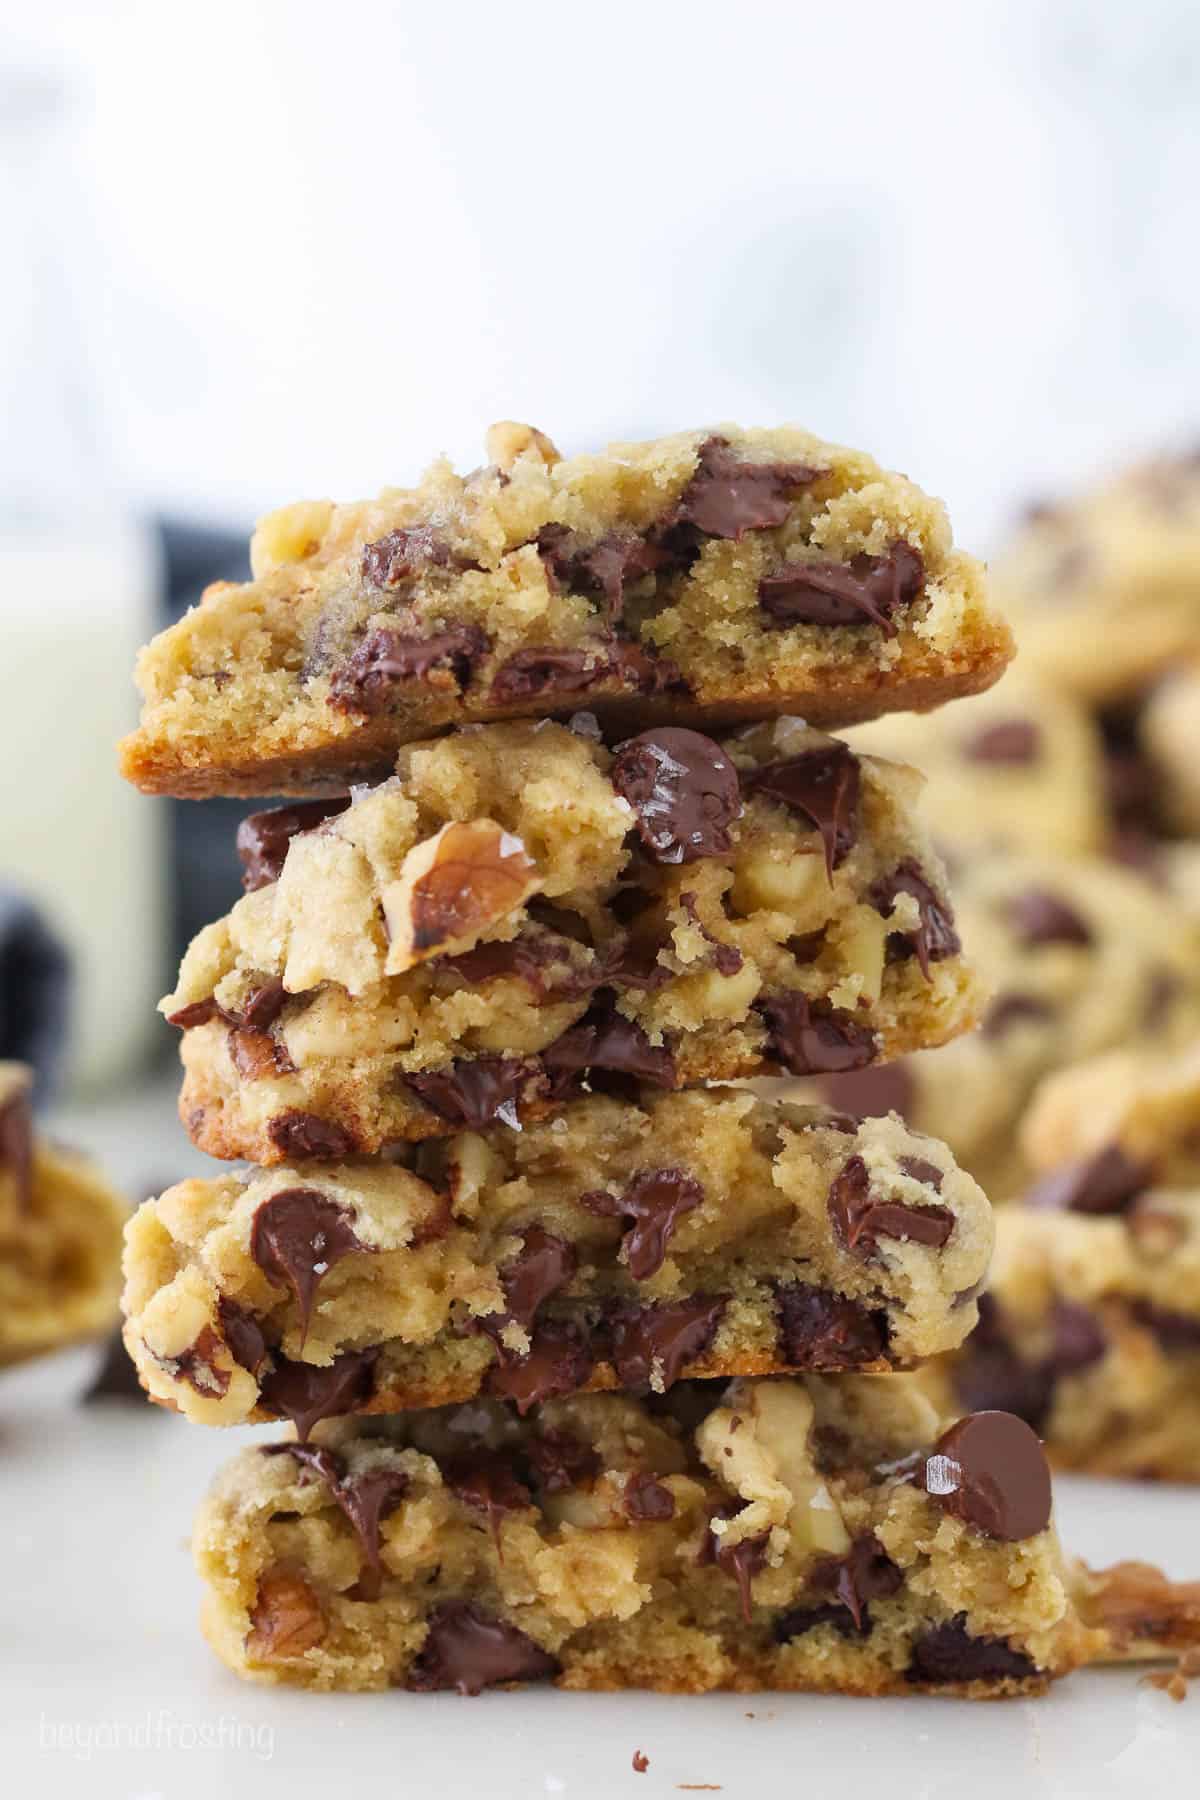 Thick chocolate chip walnut cookies stacked on each other